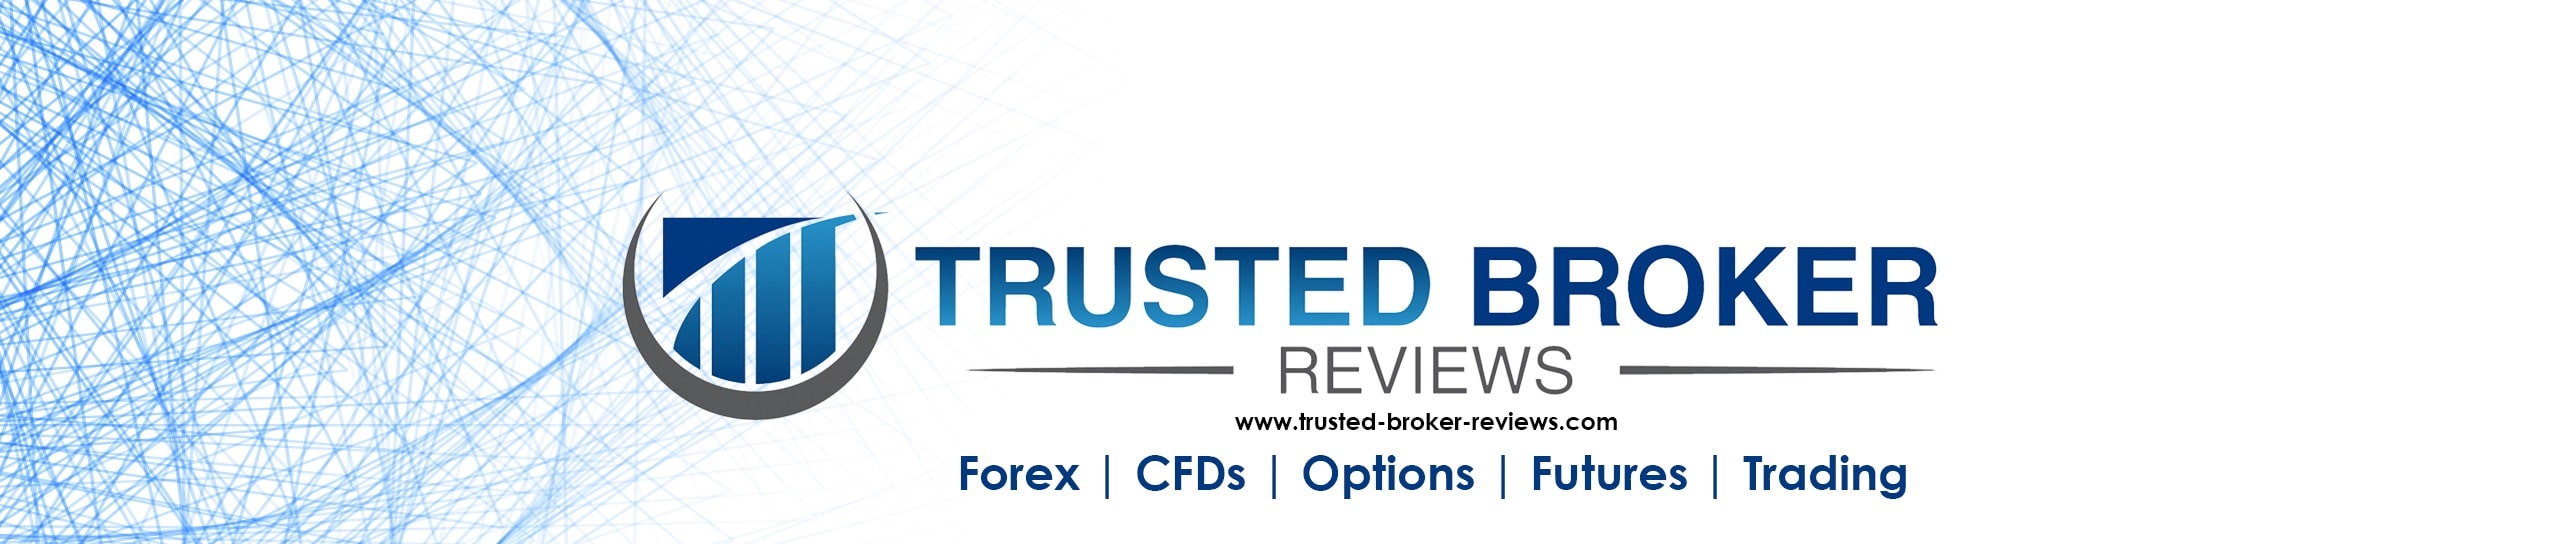 Trusted Broker Reviews Over ons Logo